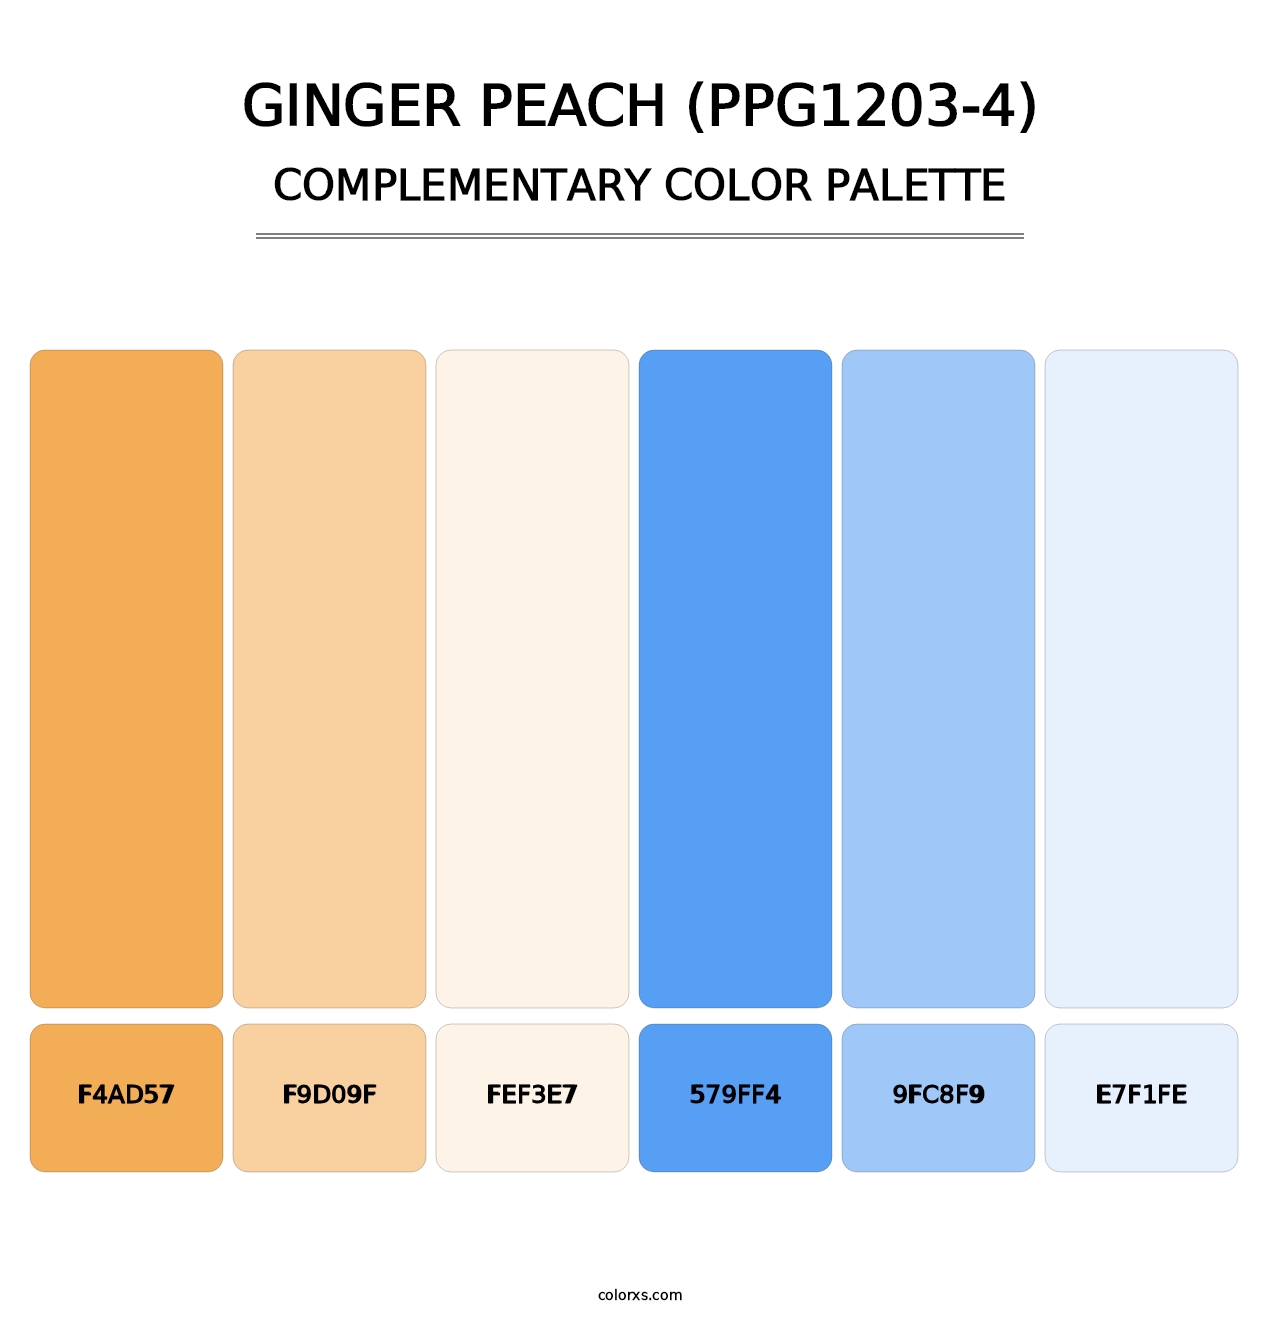 Ginger Peach (PPG1203-4) - Complementary Color Palette